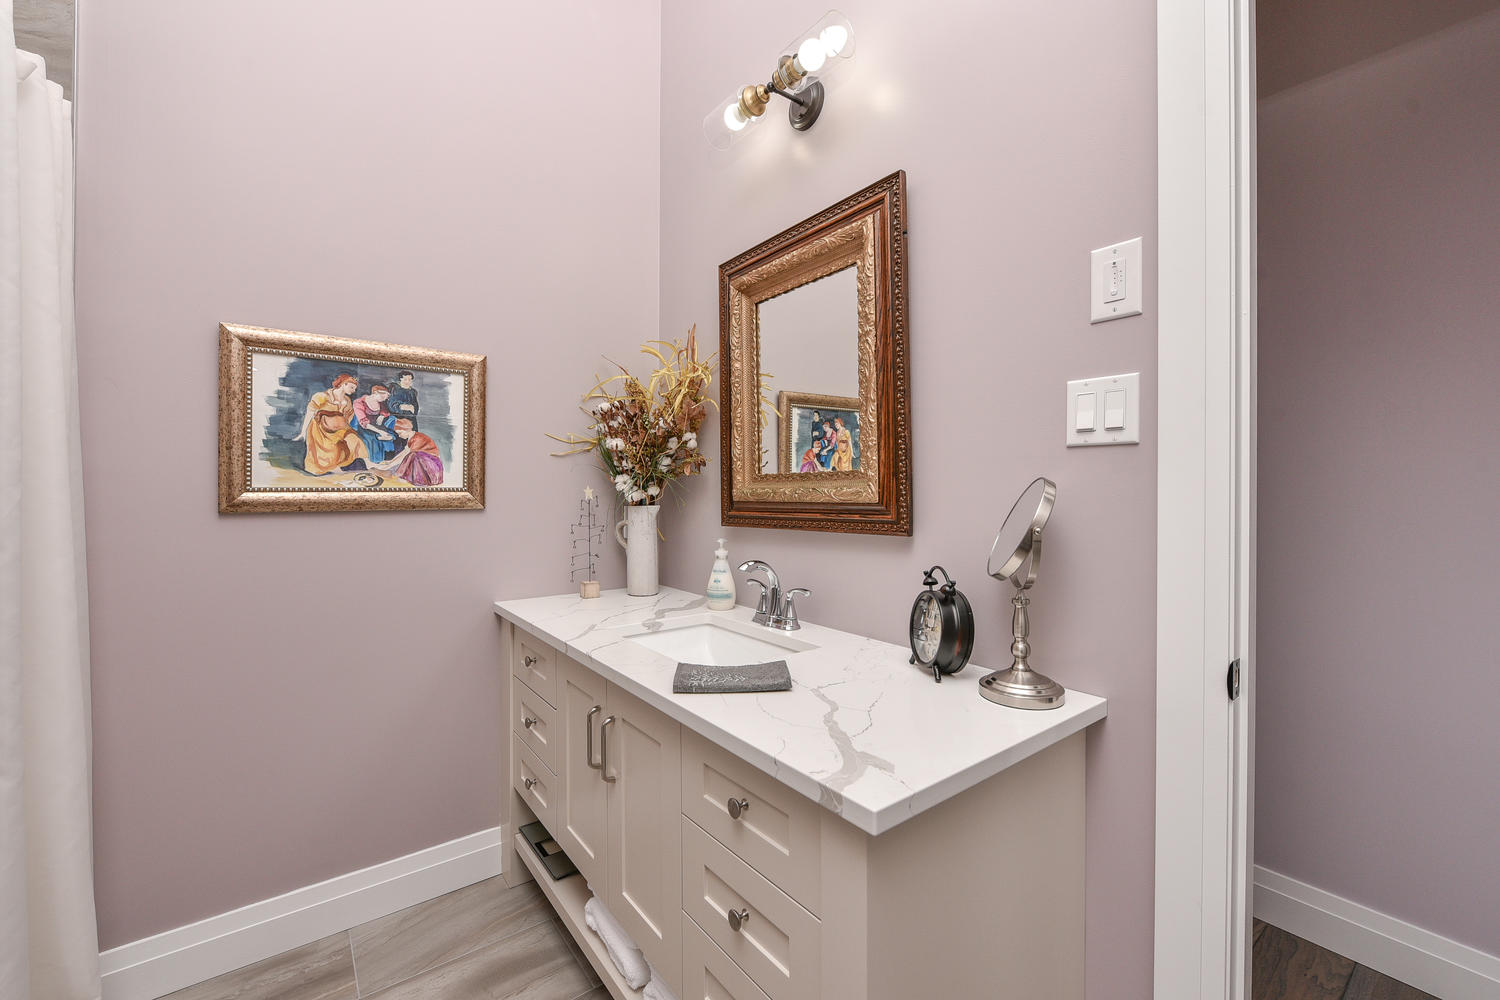 Bathroom - Traditional Family Home Project In Renfrew by Kelly Homes Inc.